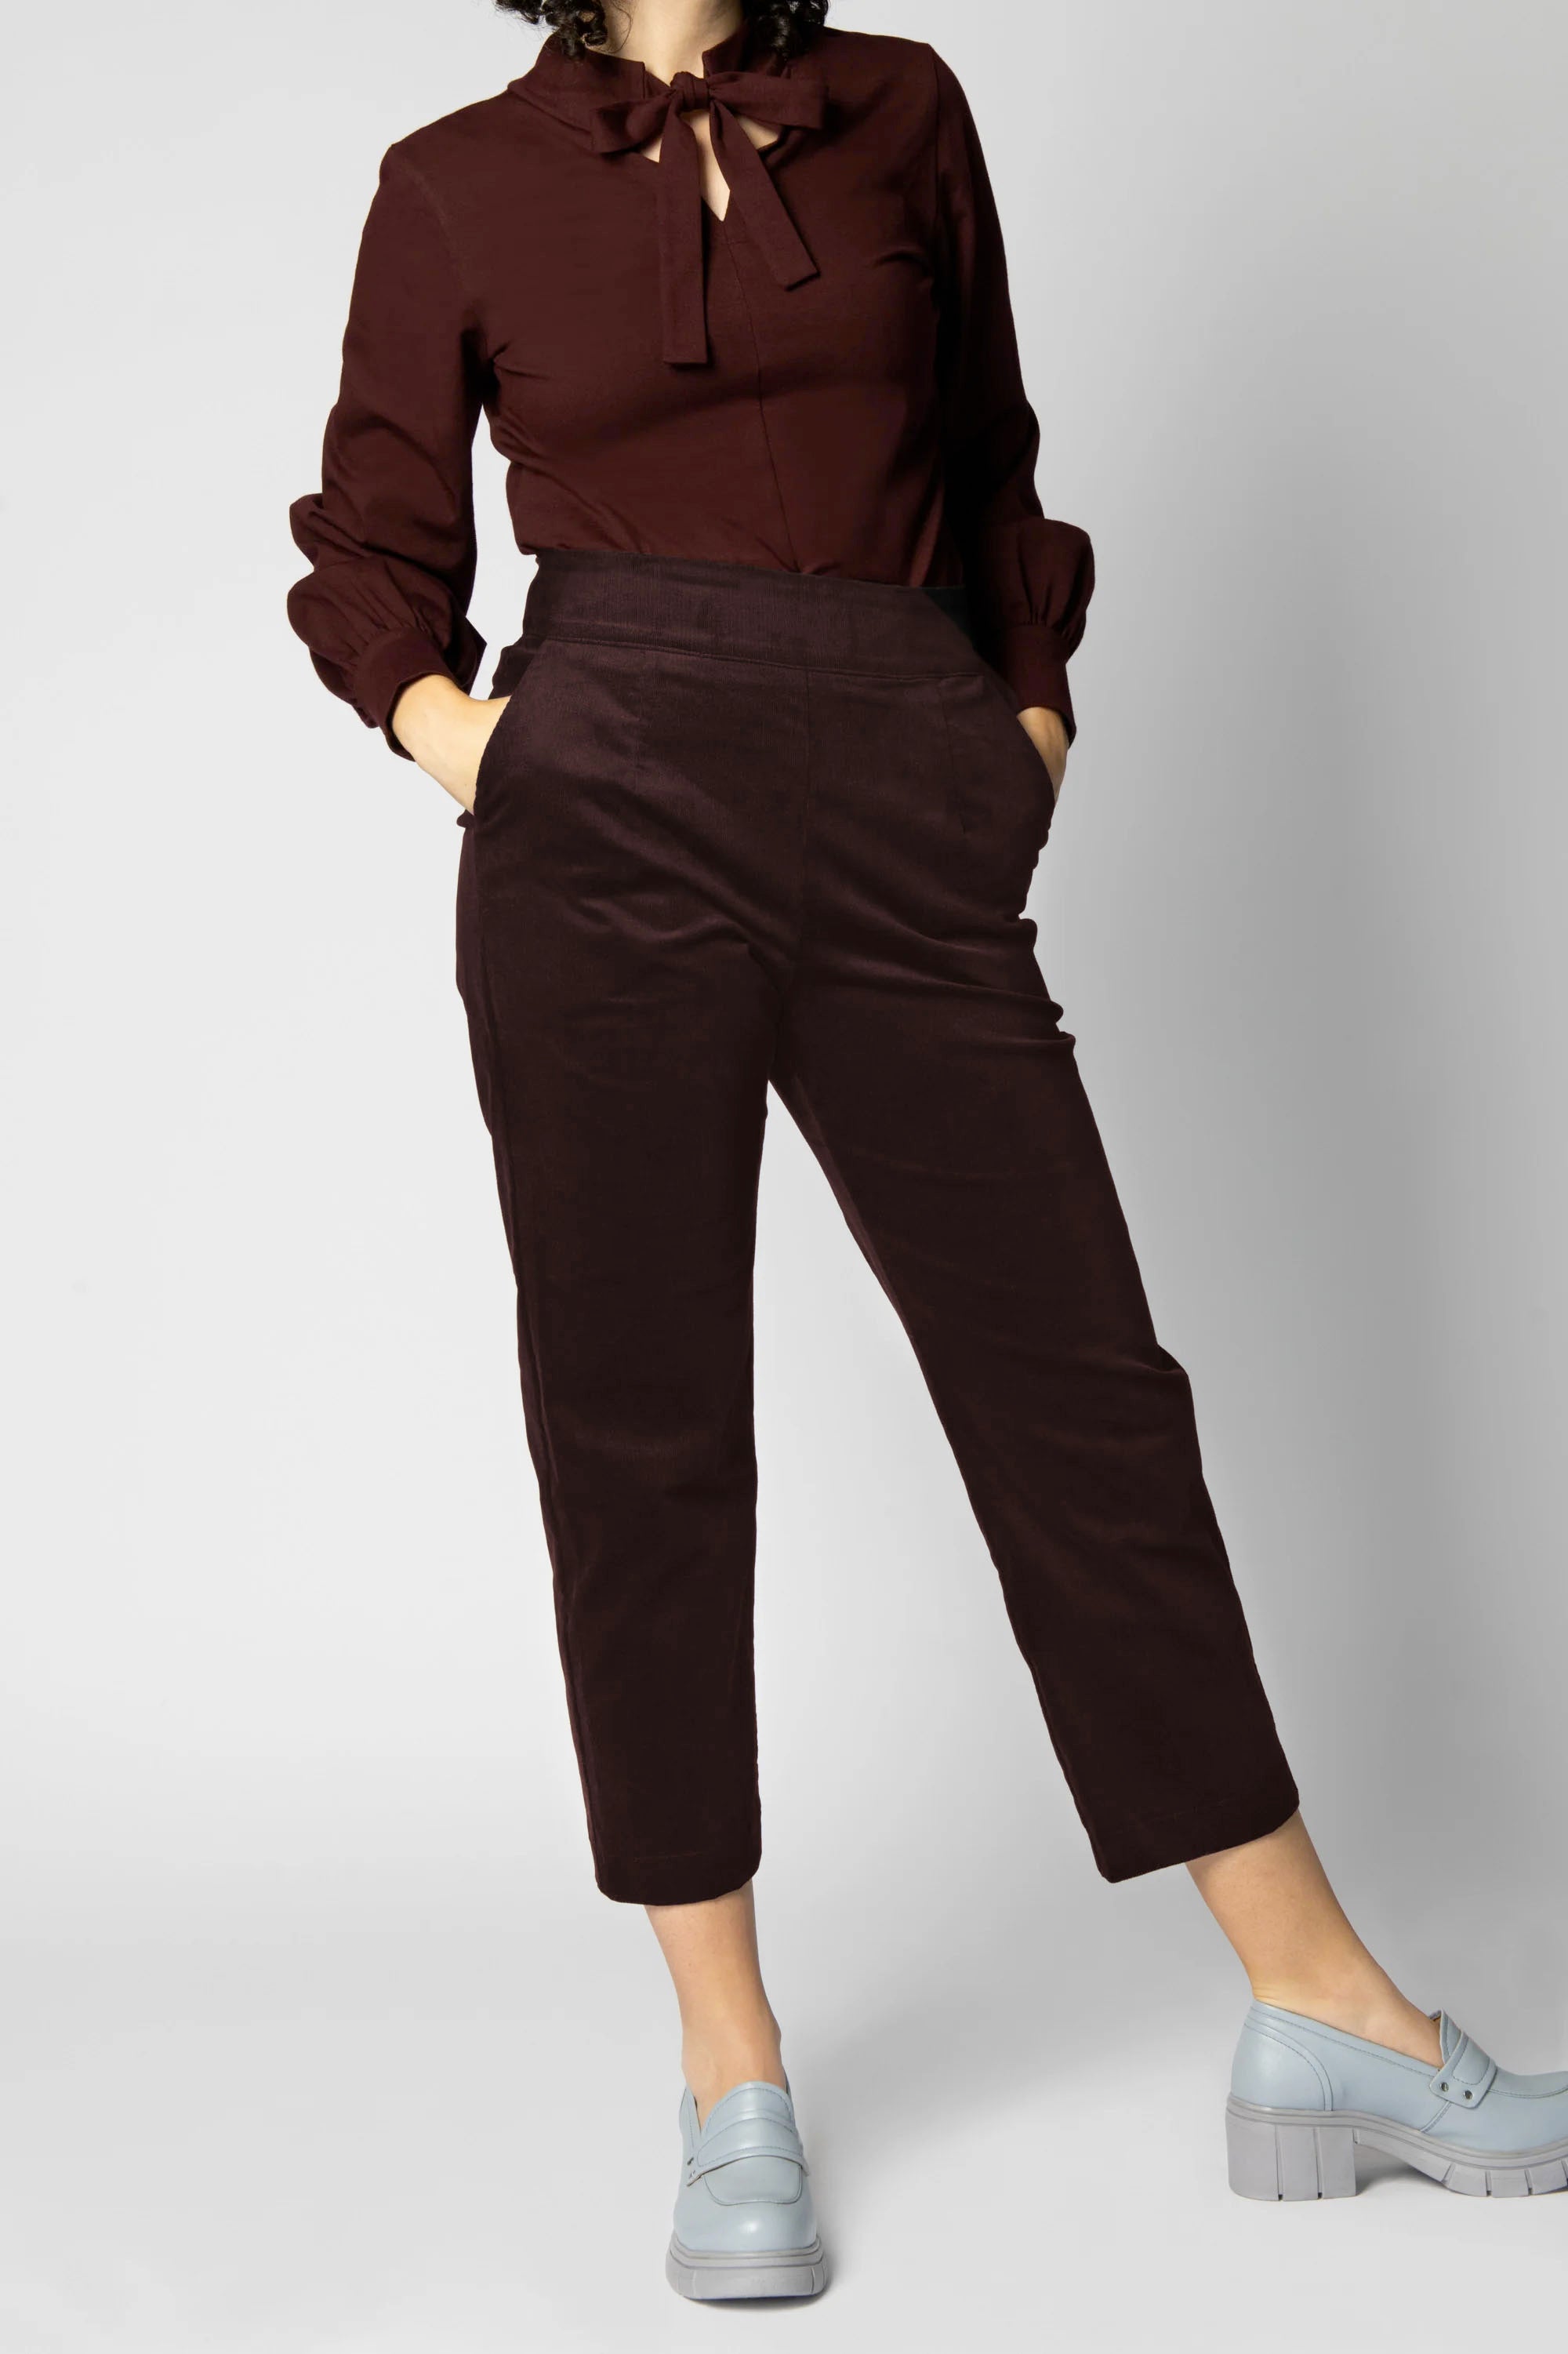 Cruz Woven Pants by Eve Lavoie, Shiraz Corduroy, high waist, straight cut with slightly tapered leg, hidden clasp at back, slant pockets, sizes XS to XL, made in Montreal